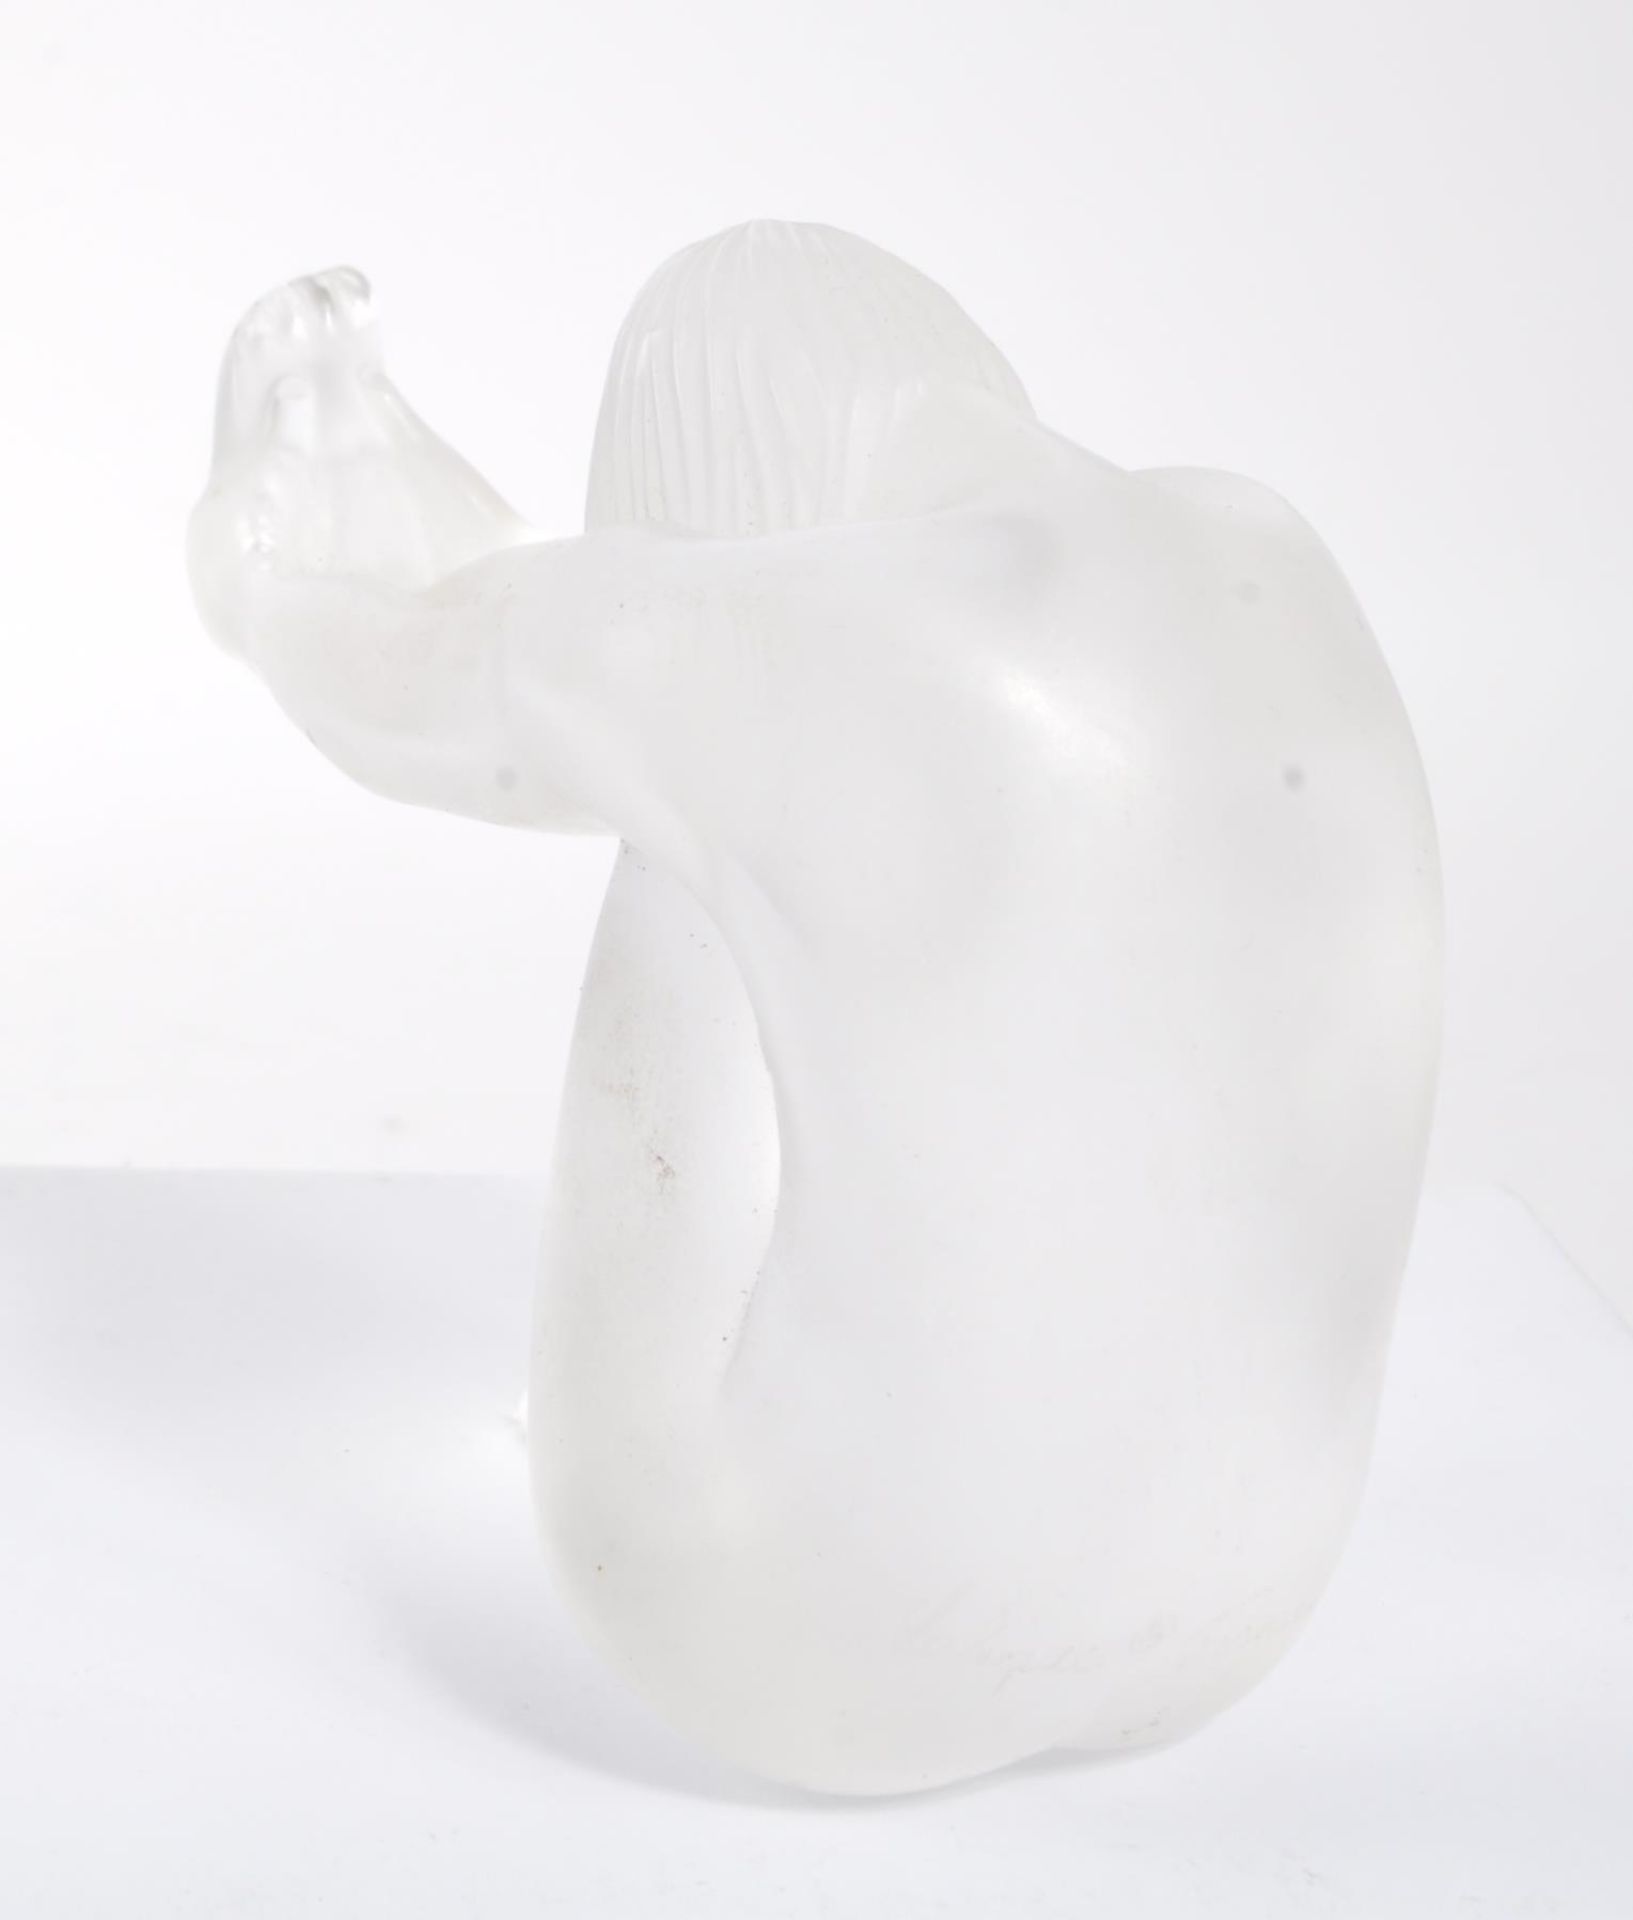 LALIQUE - STUDIO FROSTED ART GLASS OF NUDE FEMALE - Image 3 of 4